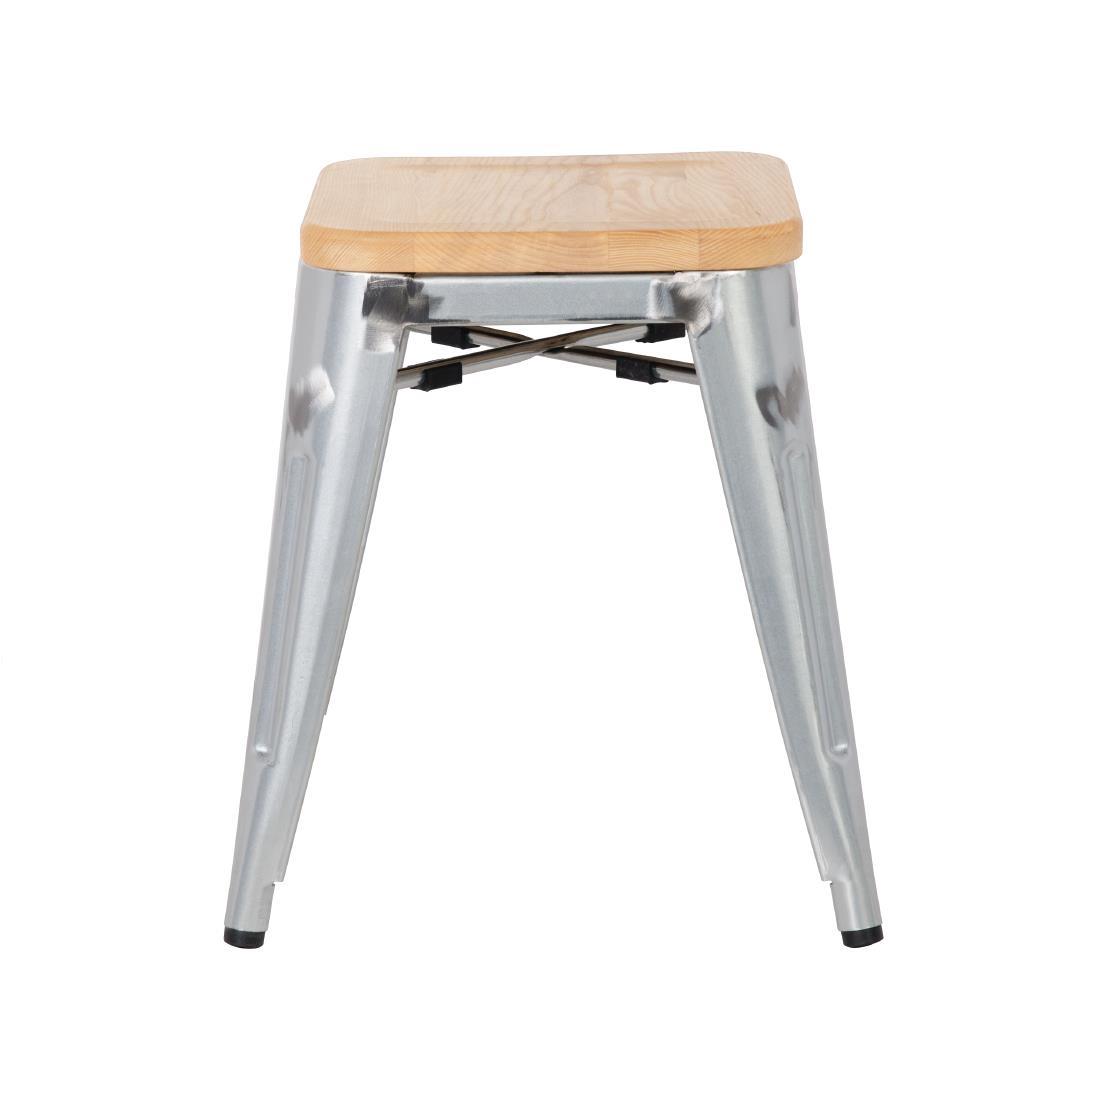 Bolero Bistro Low Stools with Wooden Seat Pad Galvanised Steel (Pack of 4) - GM634  - 2